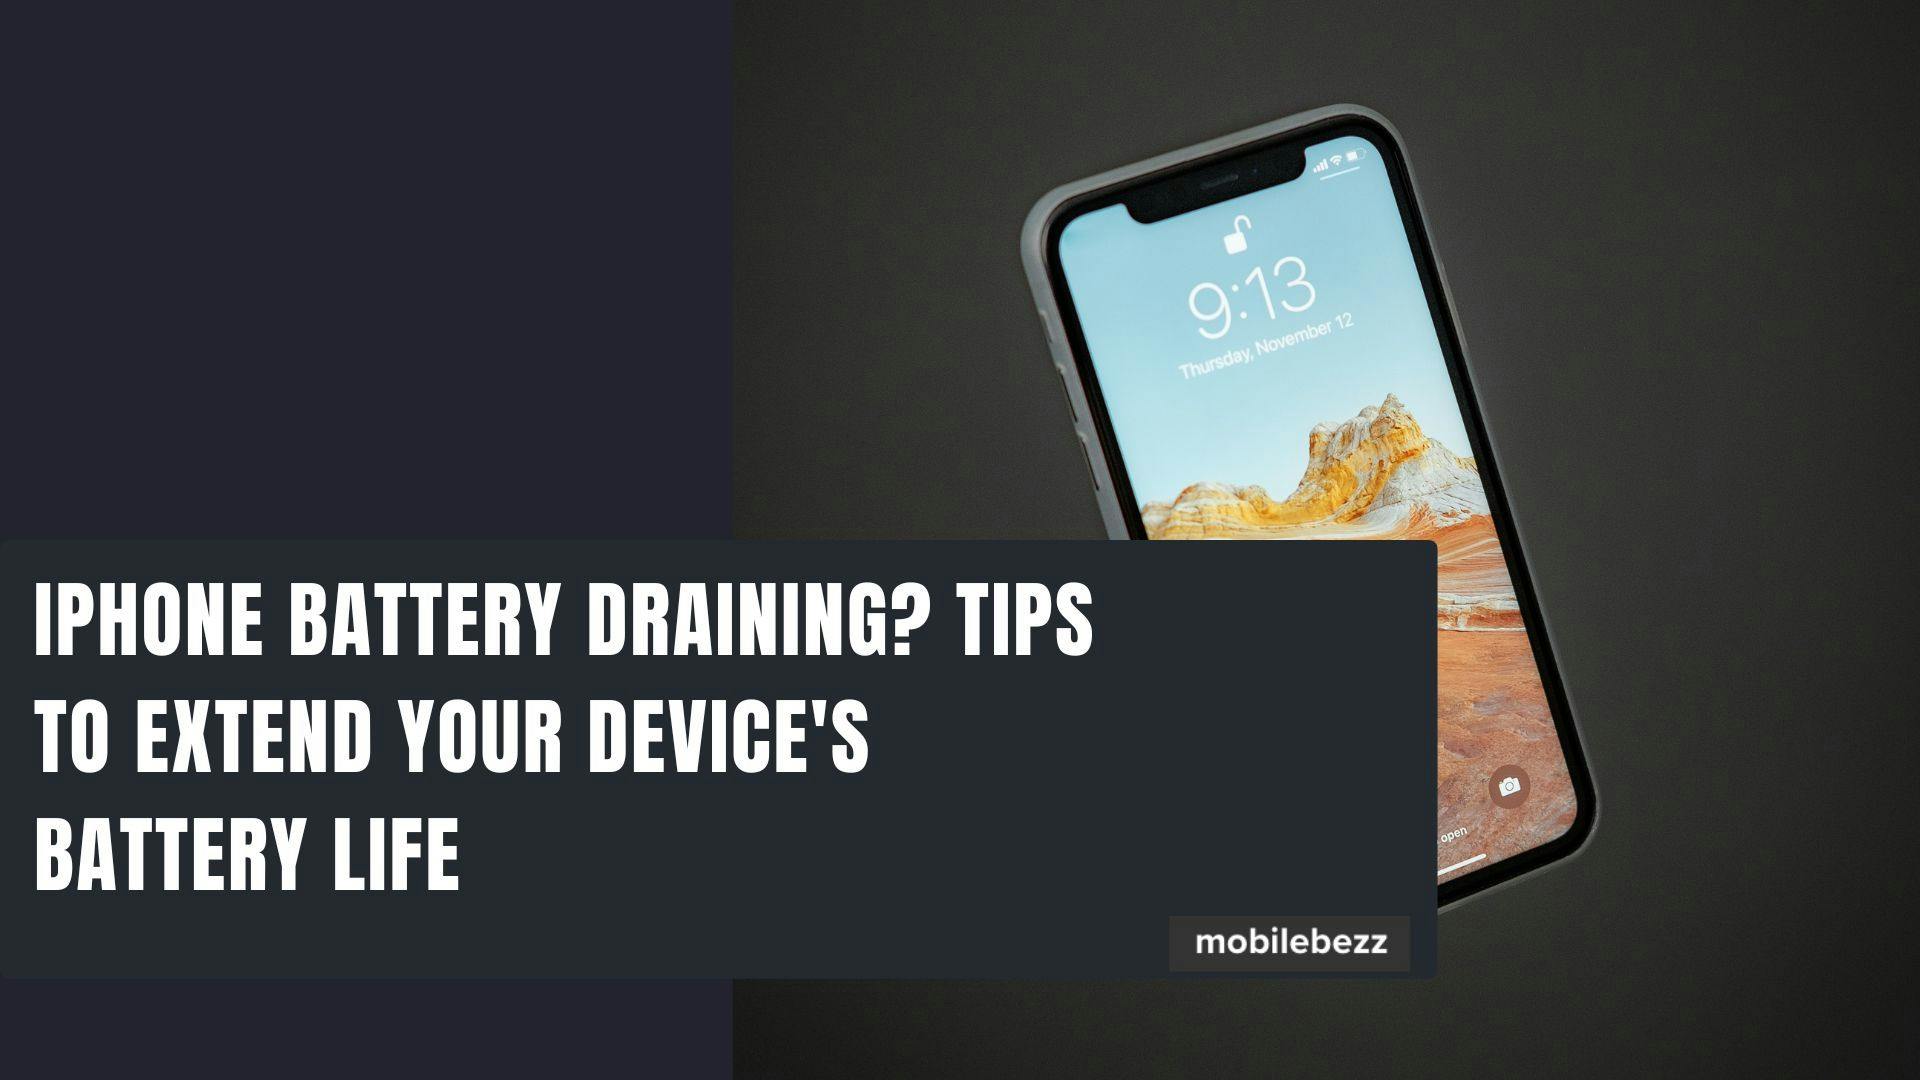 iPhone Battery Draining? Tips to Extend Your Device's Battery Life